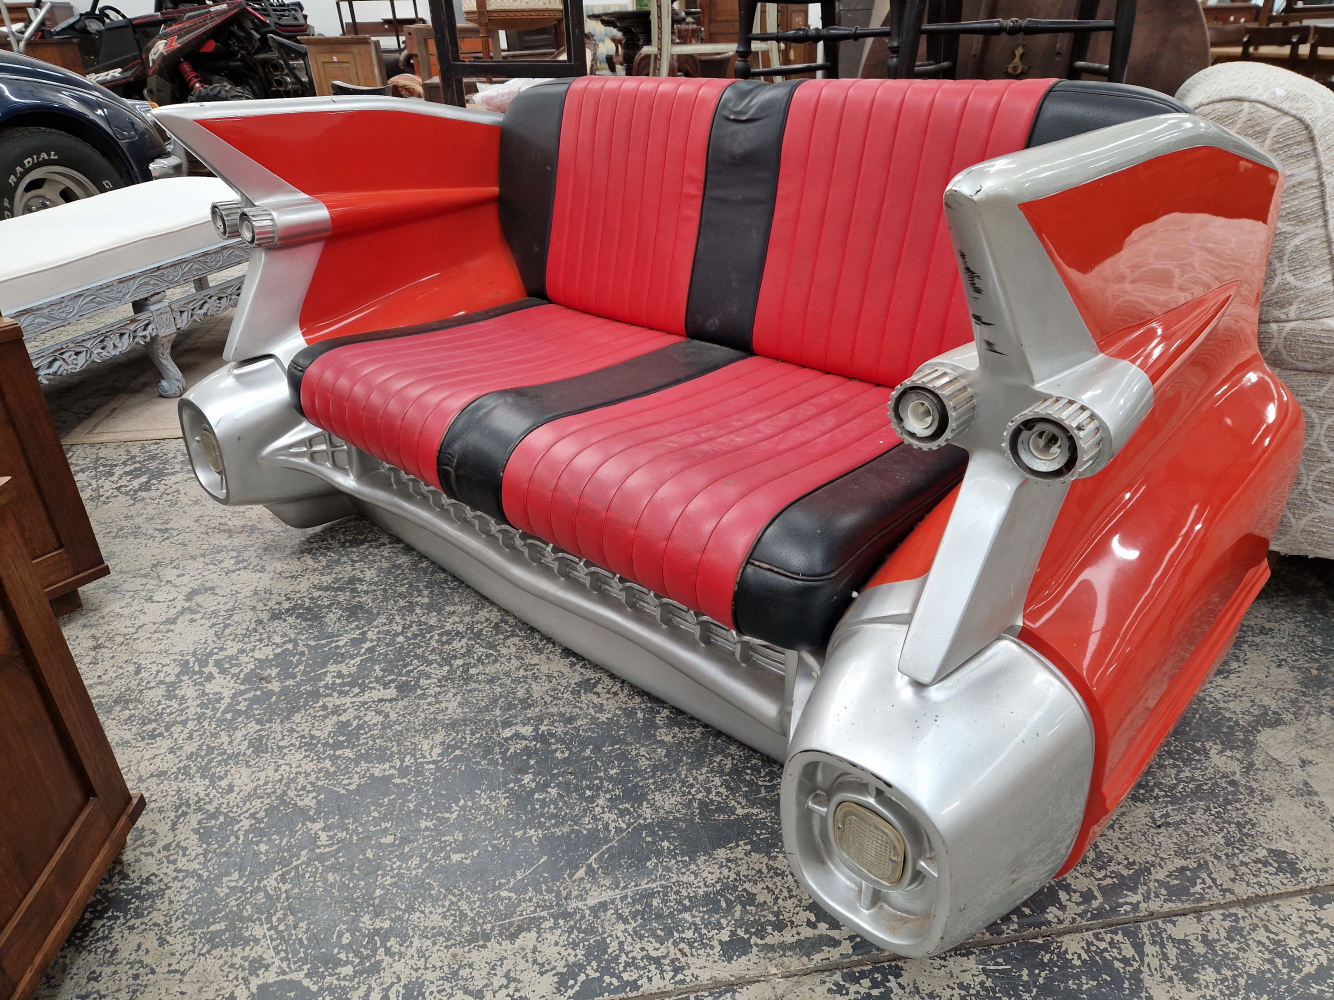 A MID CENTURY STYLE DINER SEAT FORMED AS THE TAIL END OF A CADILLAC - Image 2 of 4